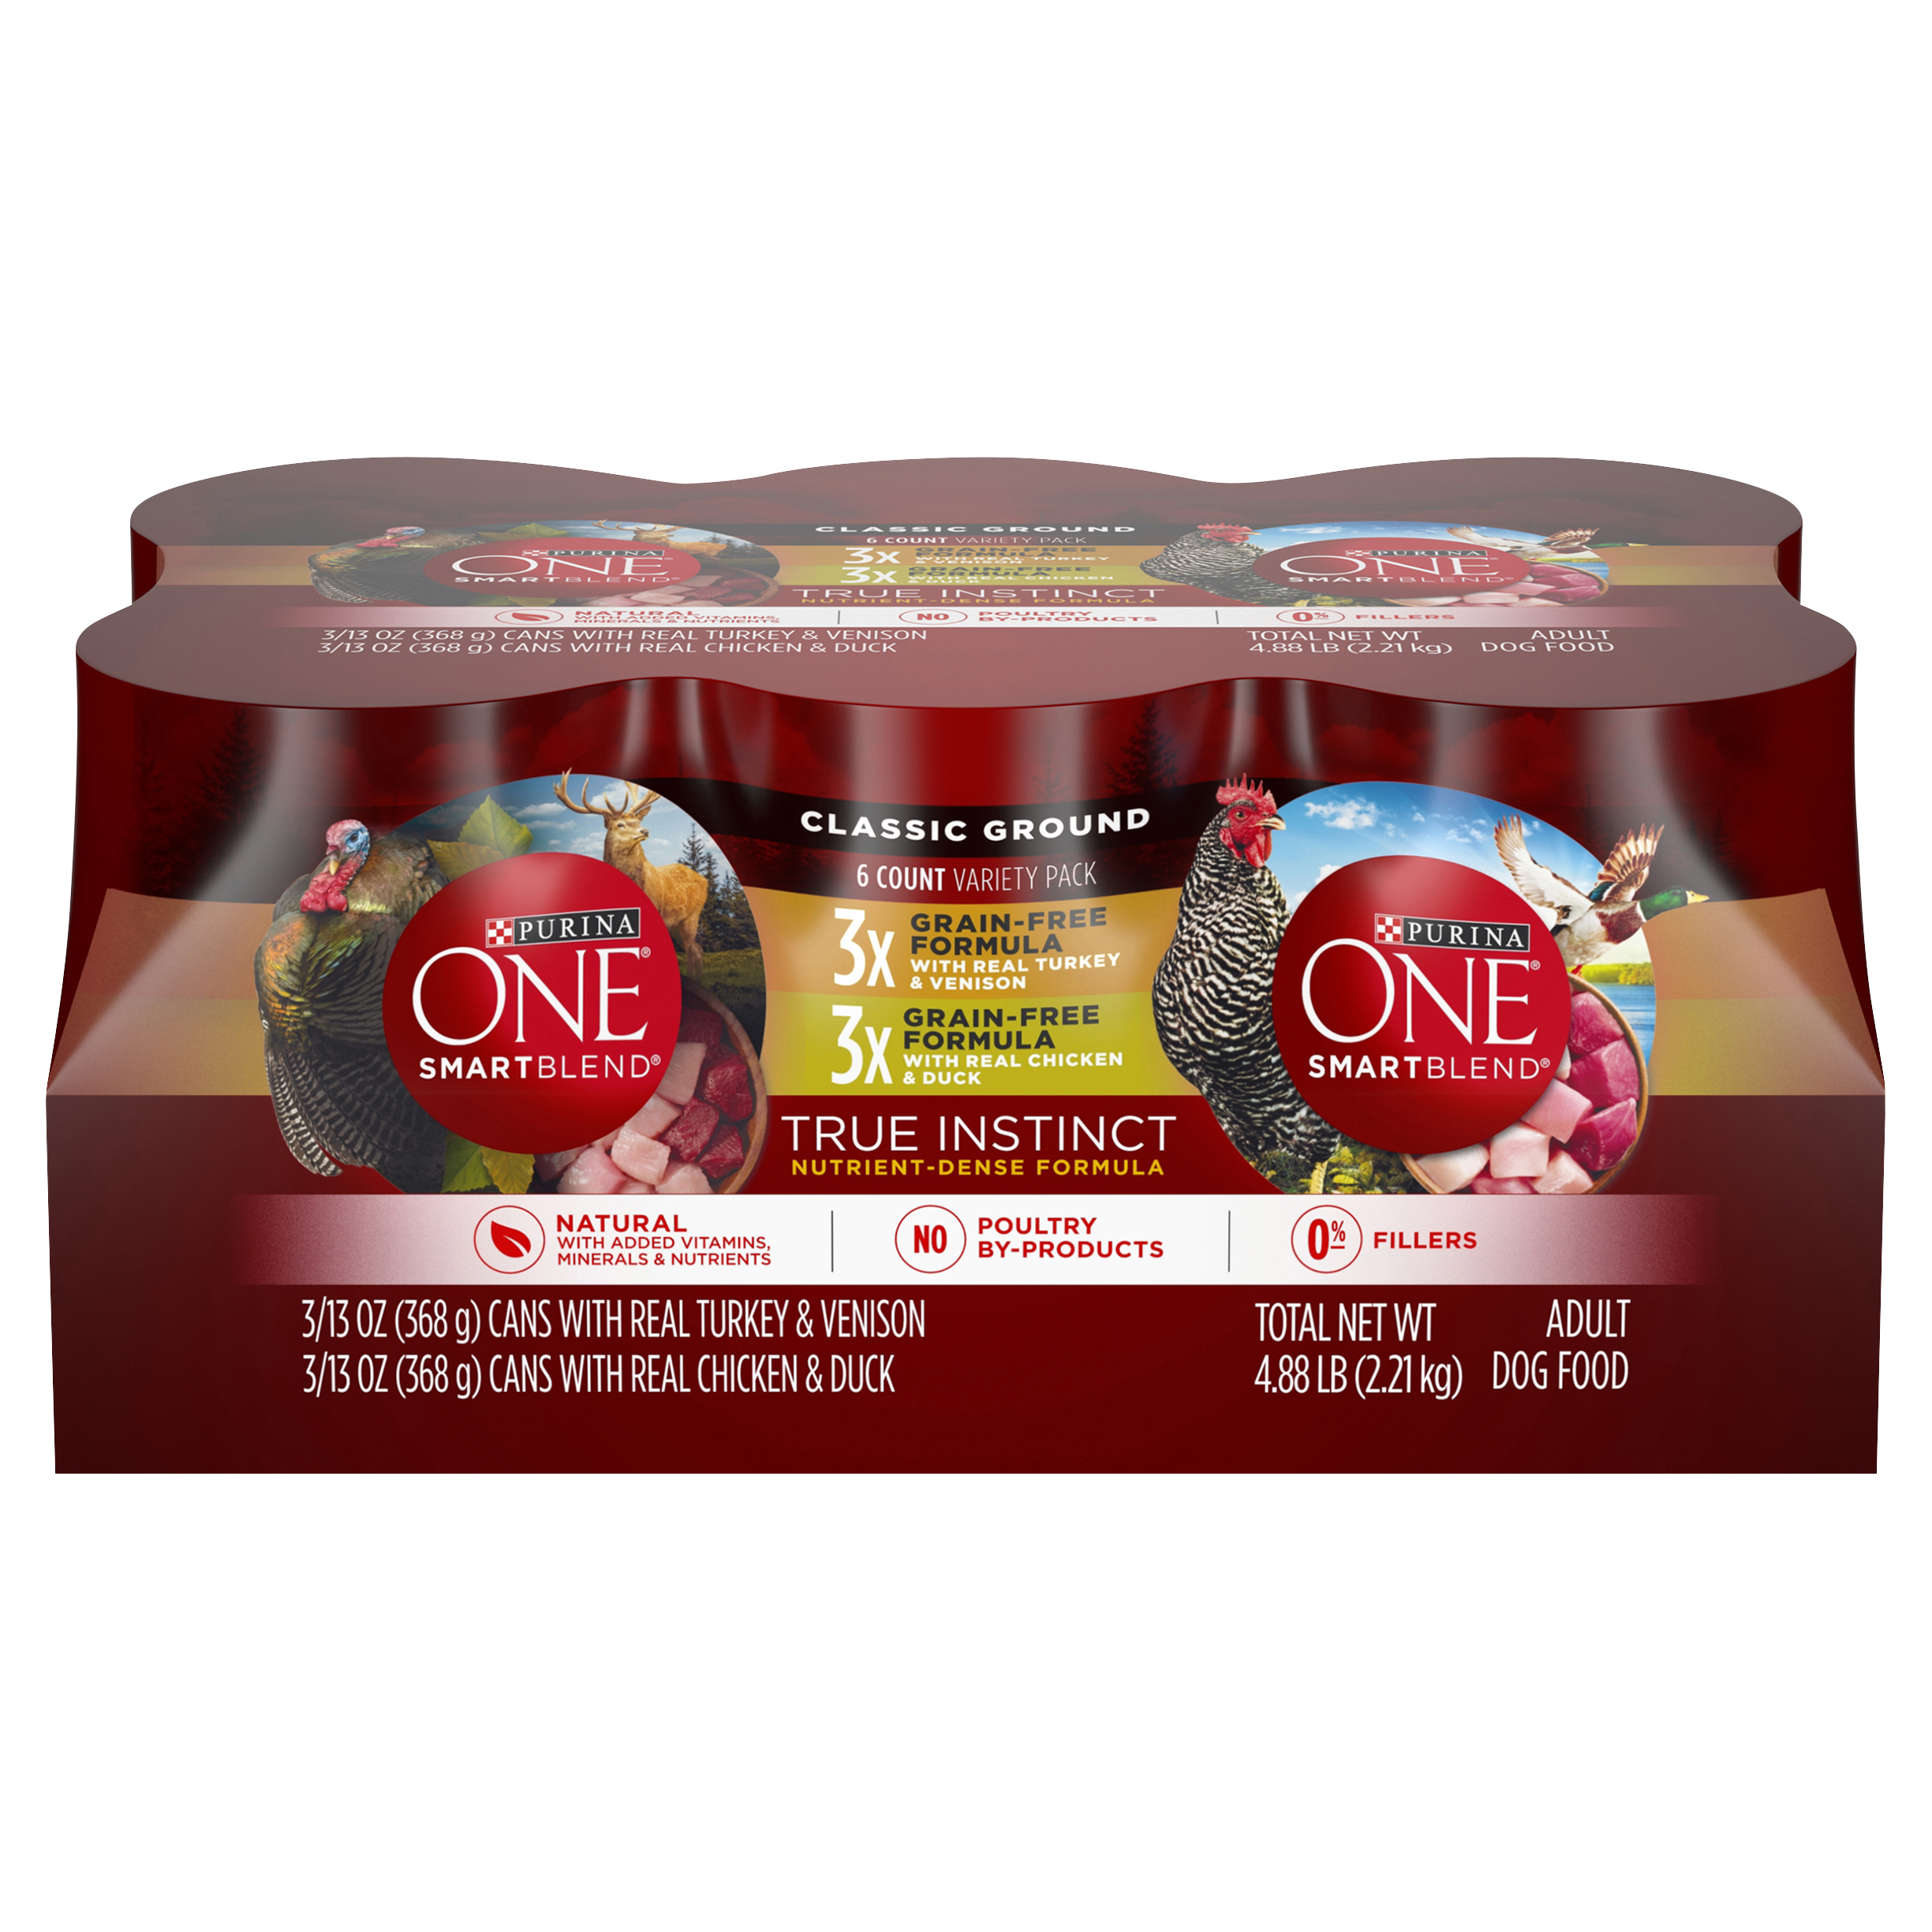 Purina ONE True Instinct Classic Soft Ground Grain Free Flavors Adult Wet Dog Food Variety Pack, 13 oz cans (6 pack) - image 5 of 12